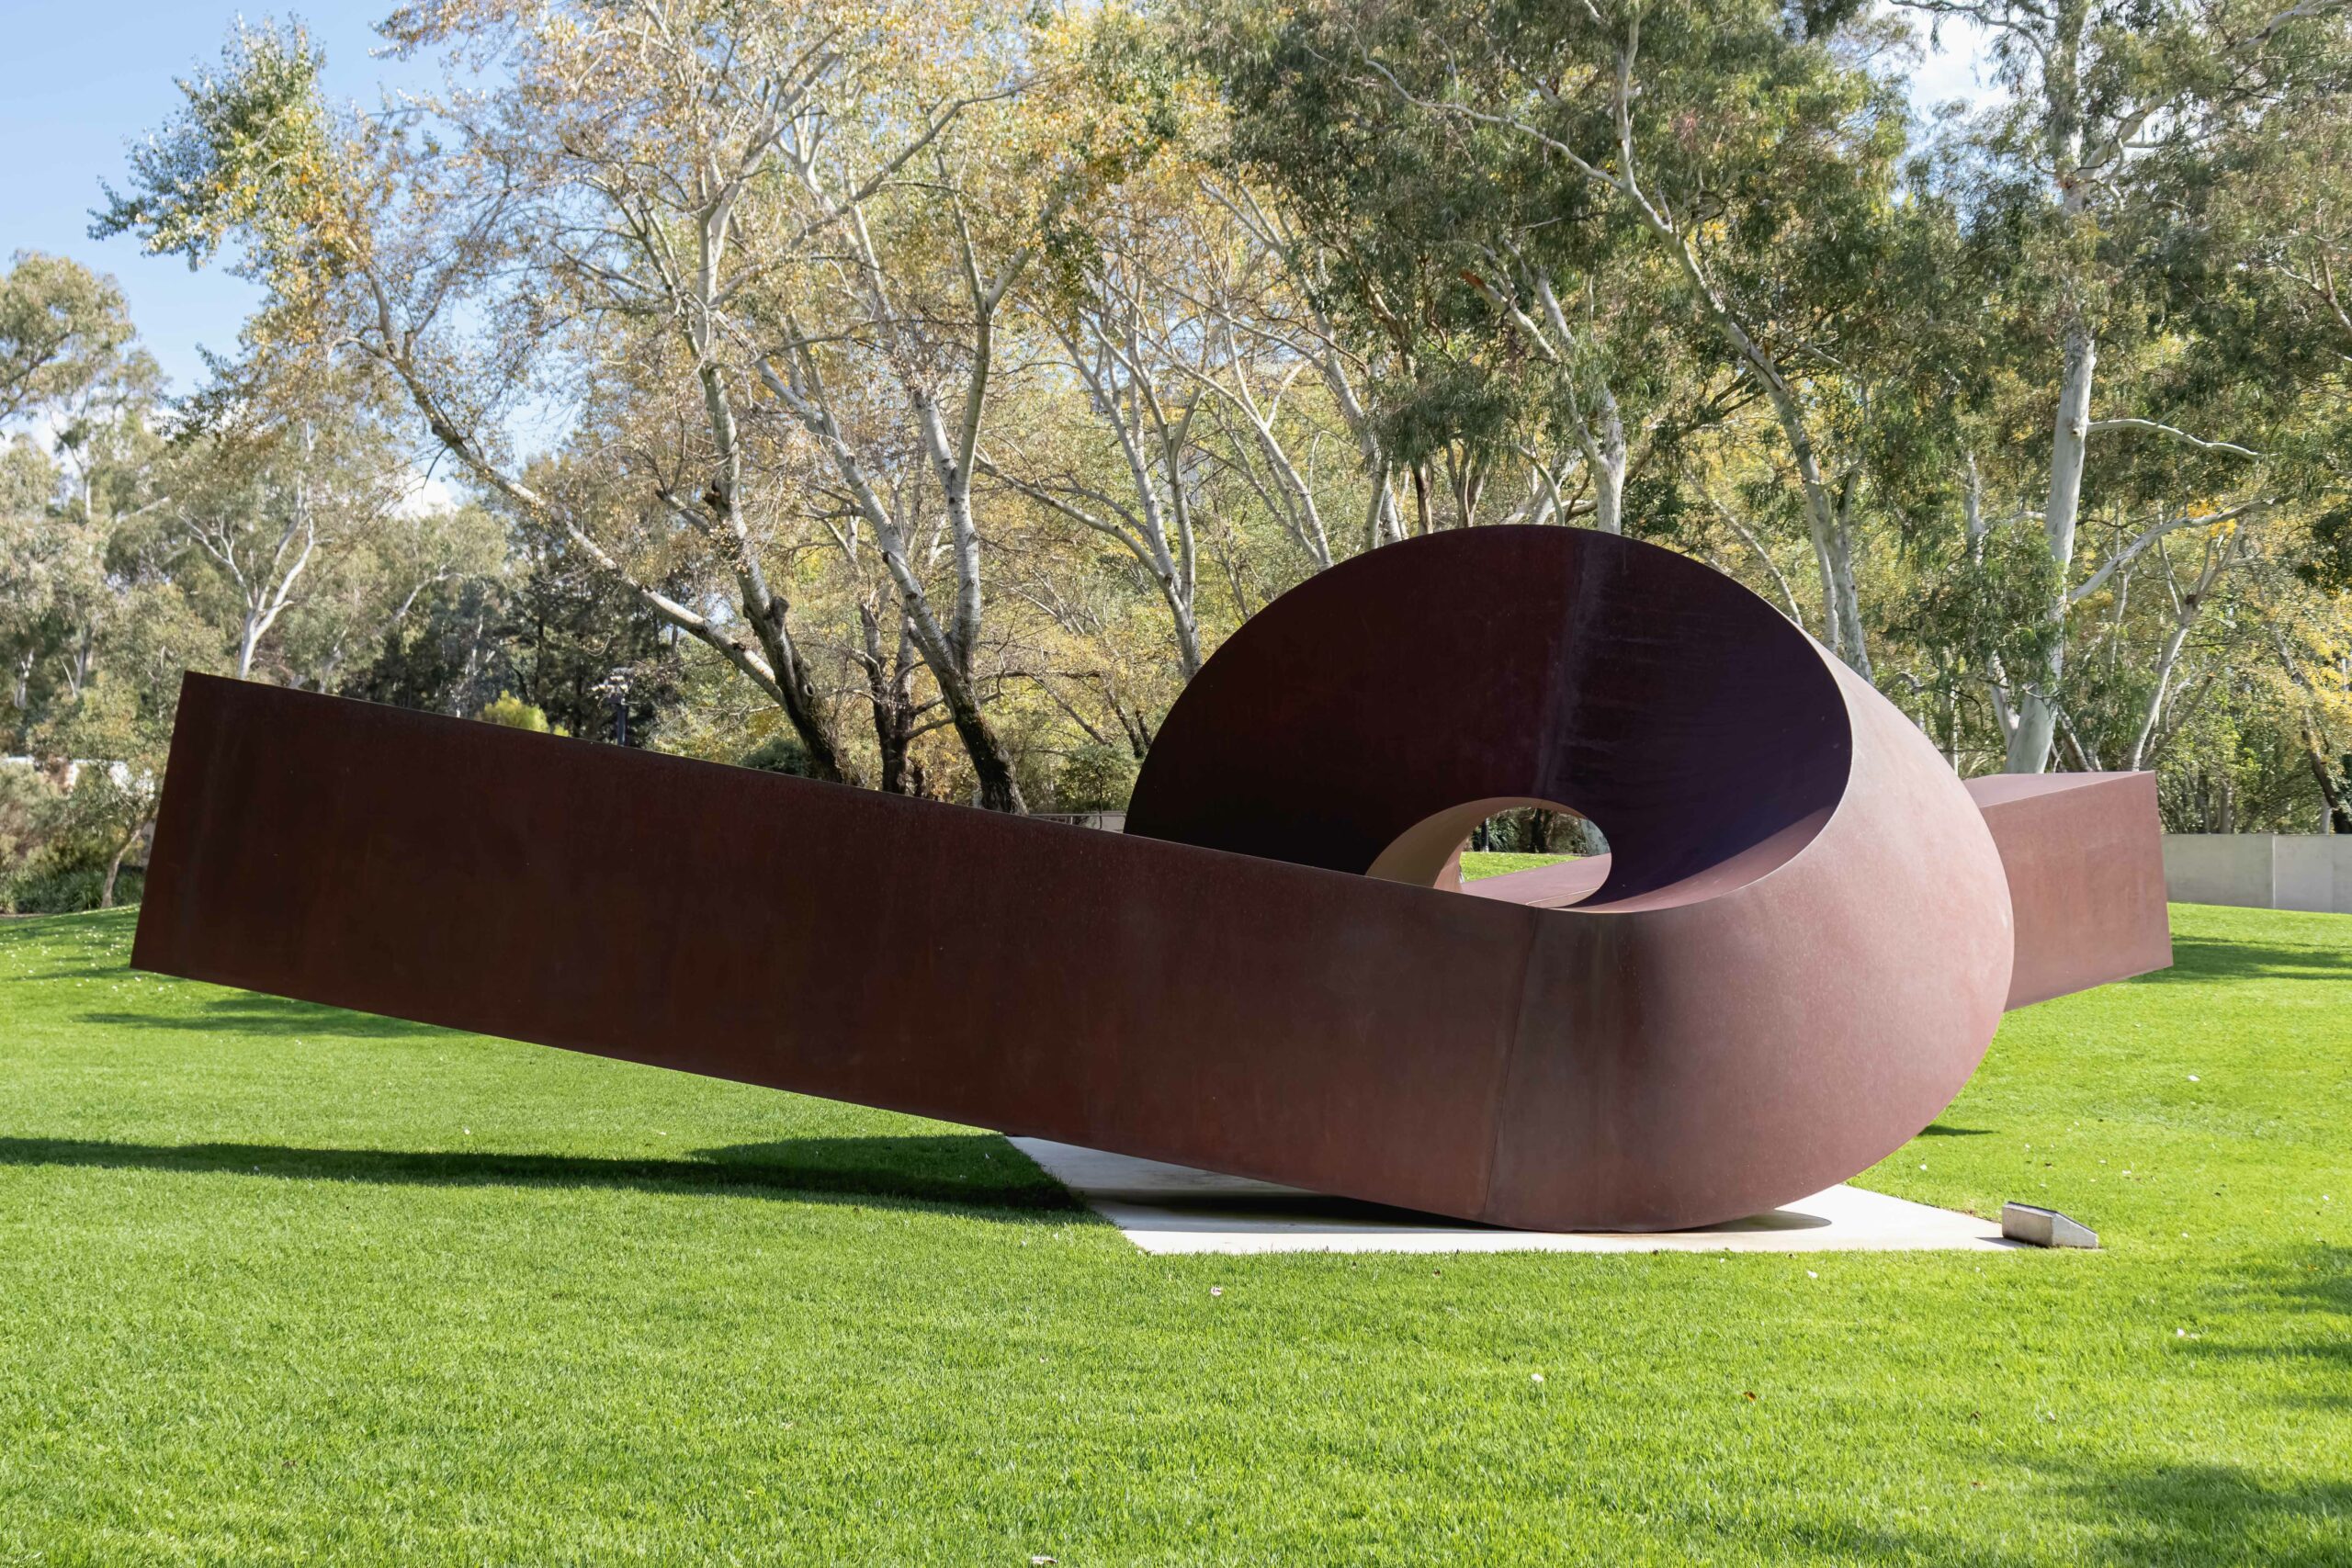 A large brown metal sculpture in the shape of a twist in an outdoor setting with trees in the background